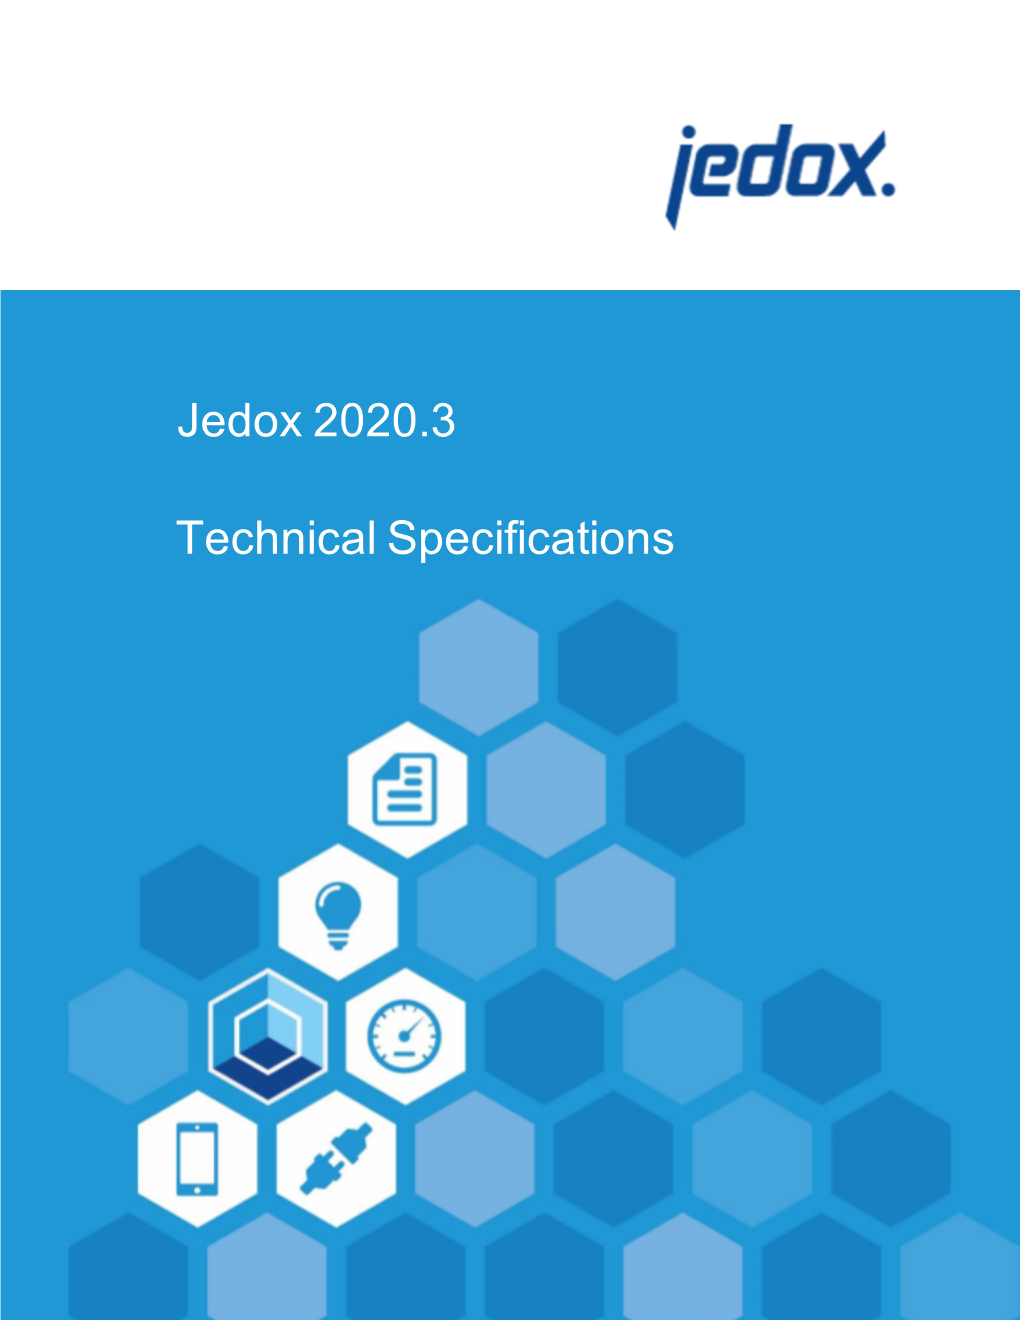 Jedox Technical Specifications 2020.3